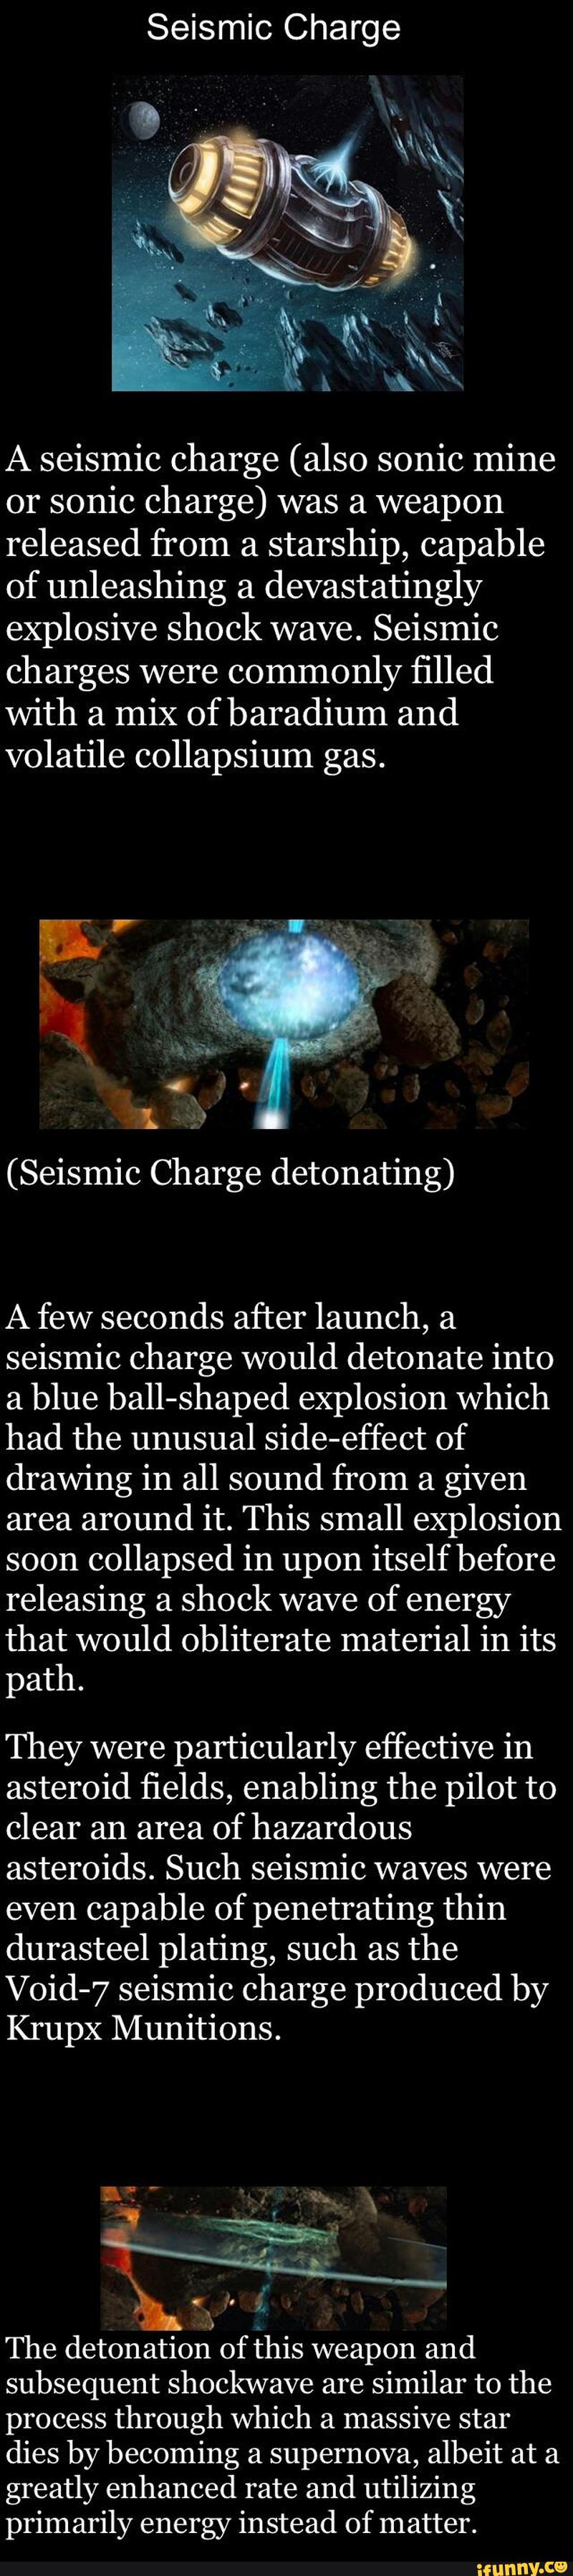 sonic charge explosives